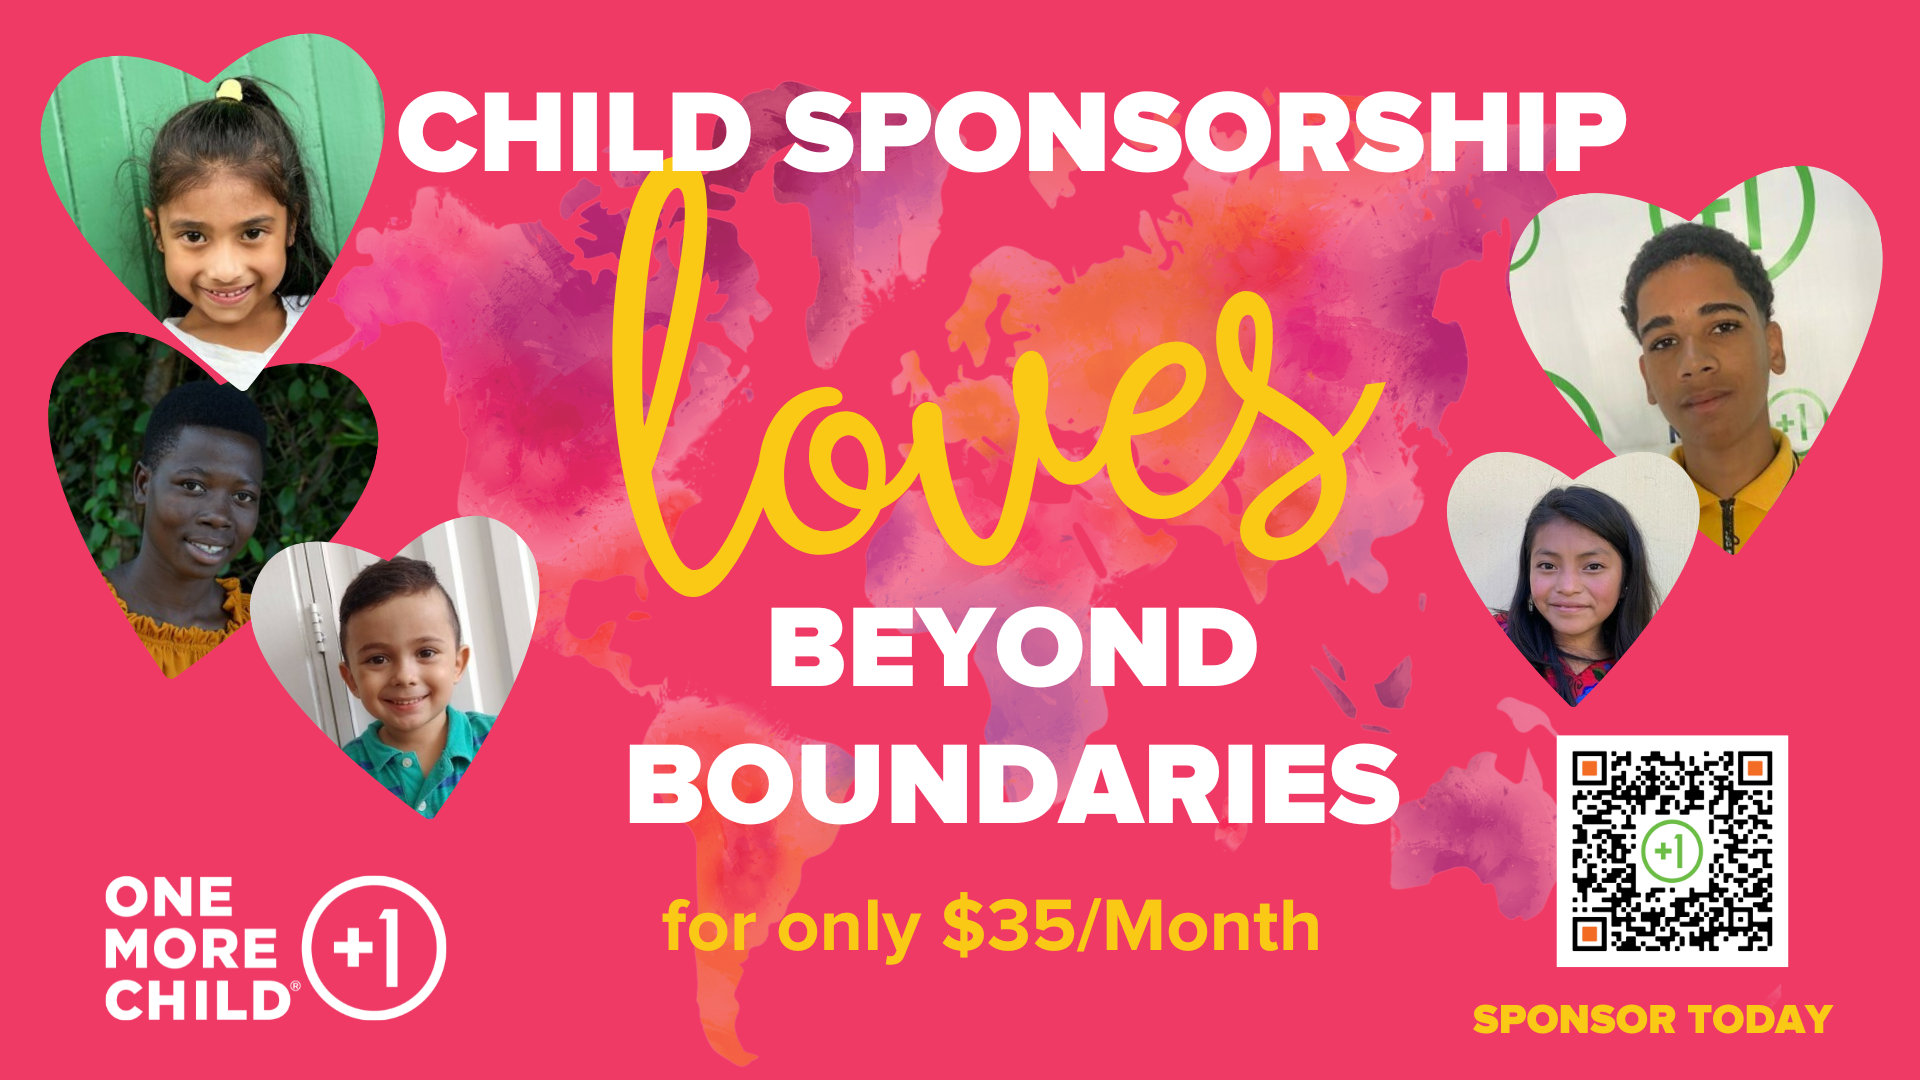 You love beyond boundaries by sponsoring a child